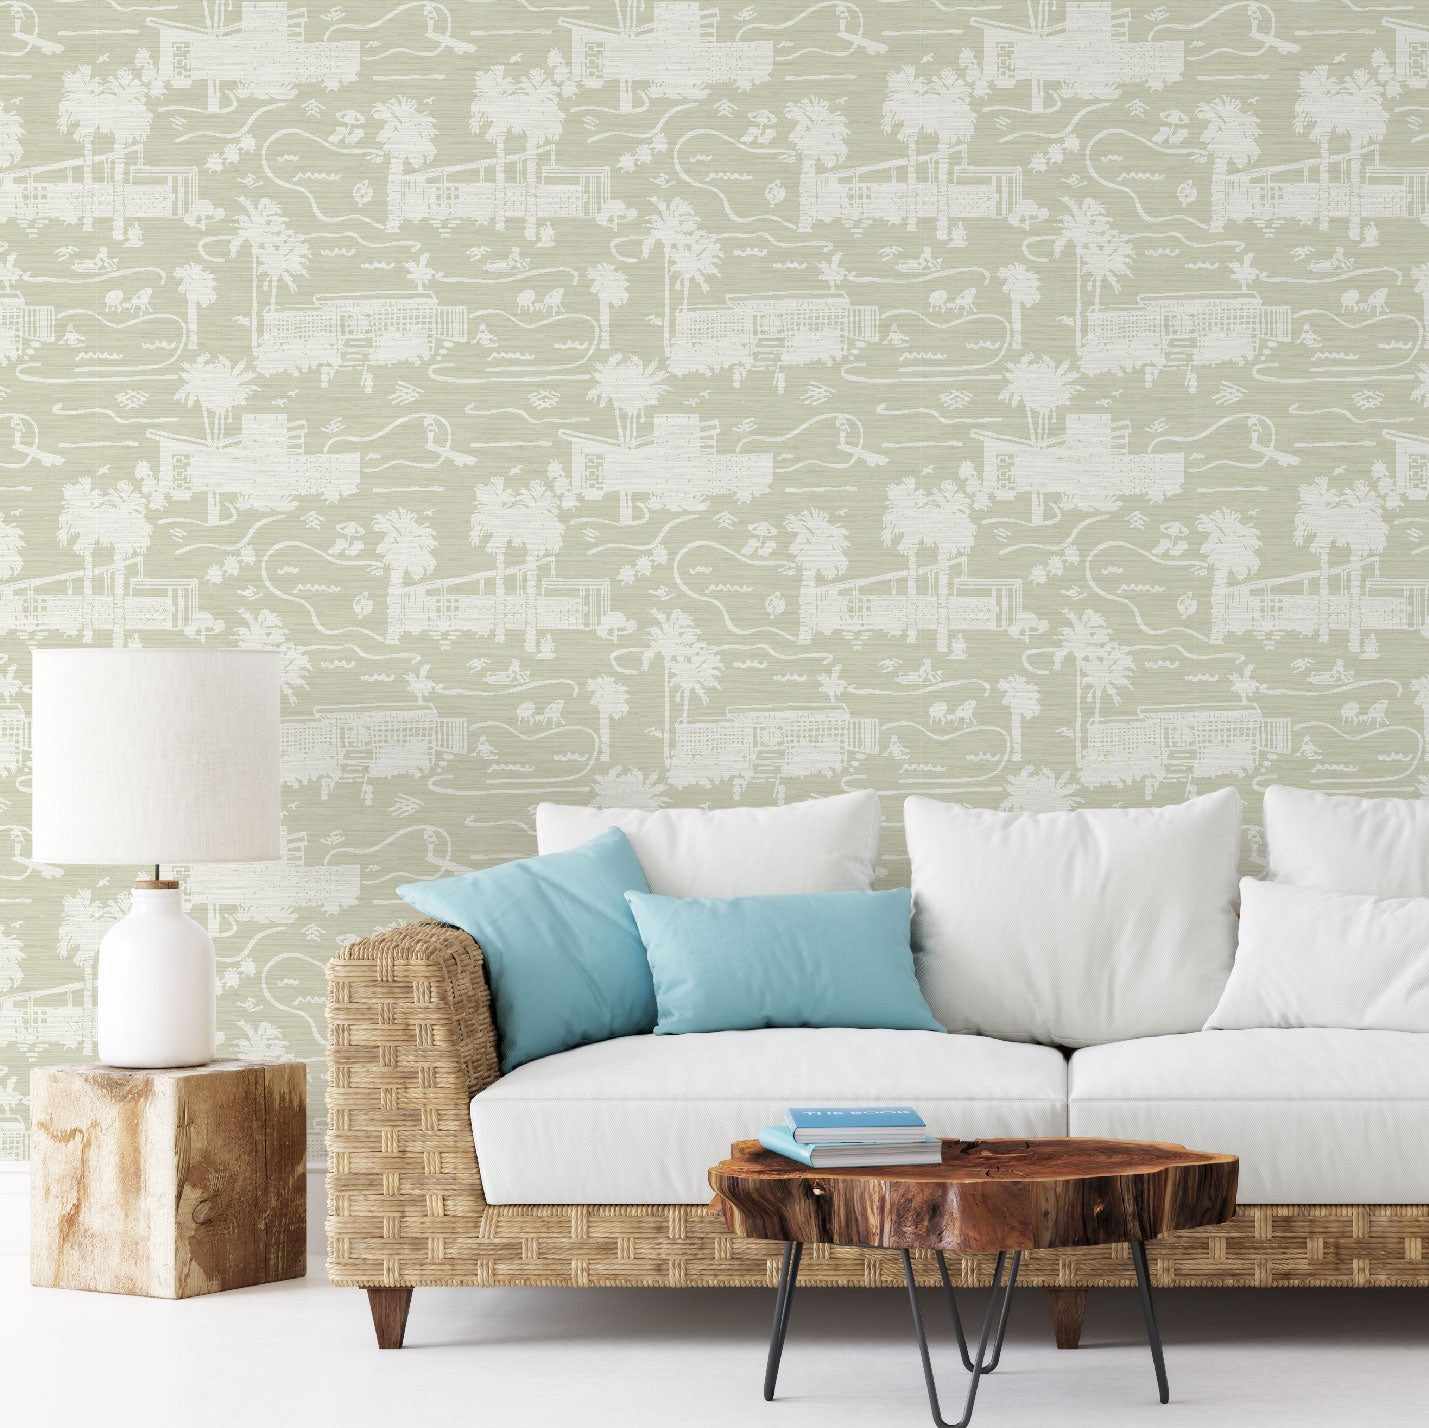 living room with grasscloth toile printed wallpaper with mid century modern houses inspired by palm springs featuring swimming pools, palm trees and secret suntanning ladies in this hand drawn one color printed design with tan base and white print